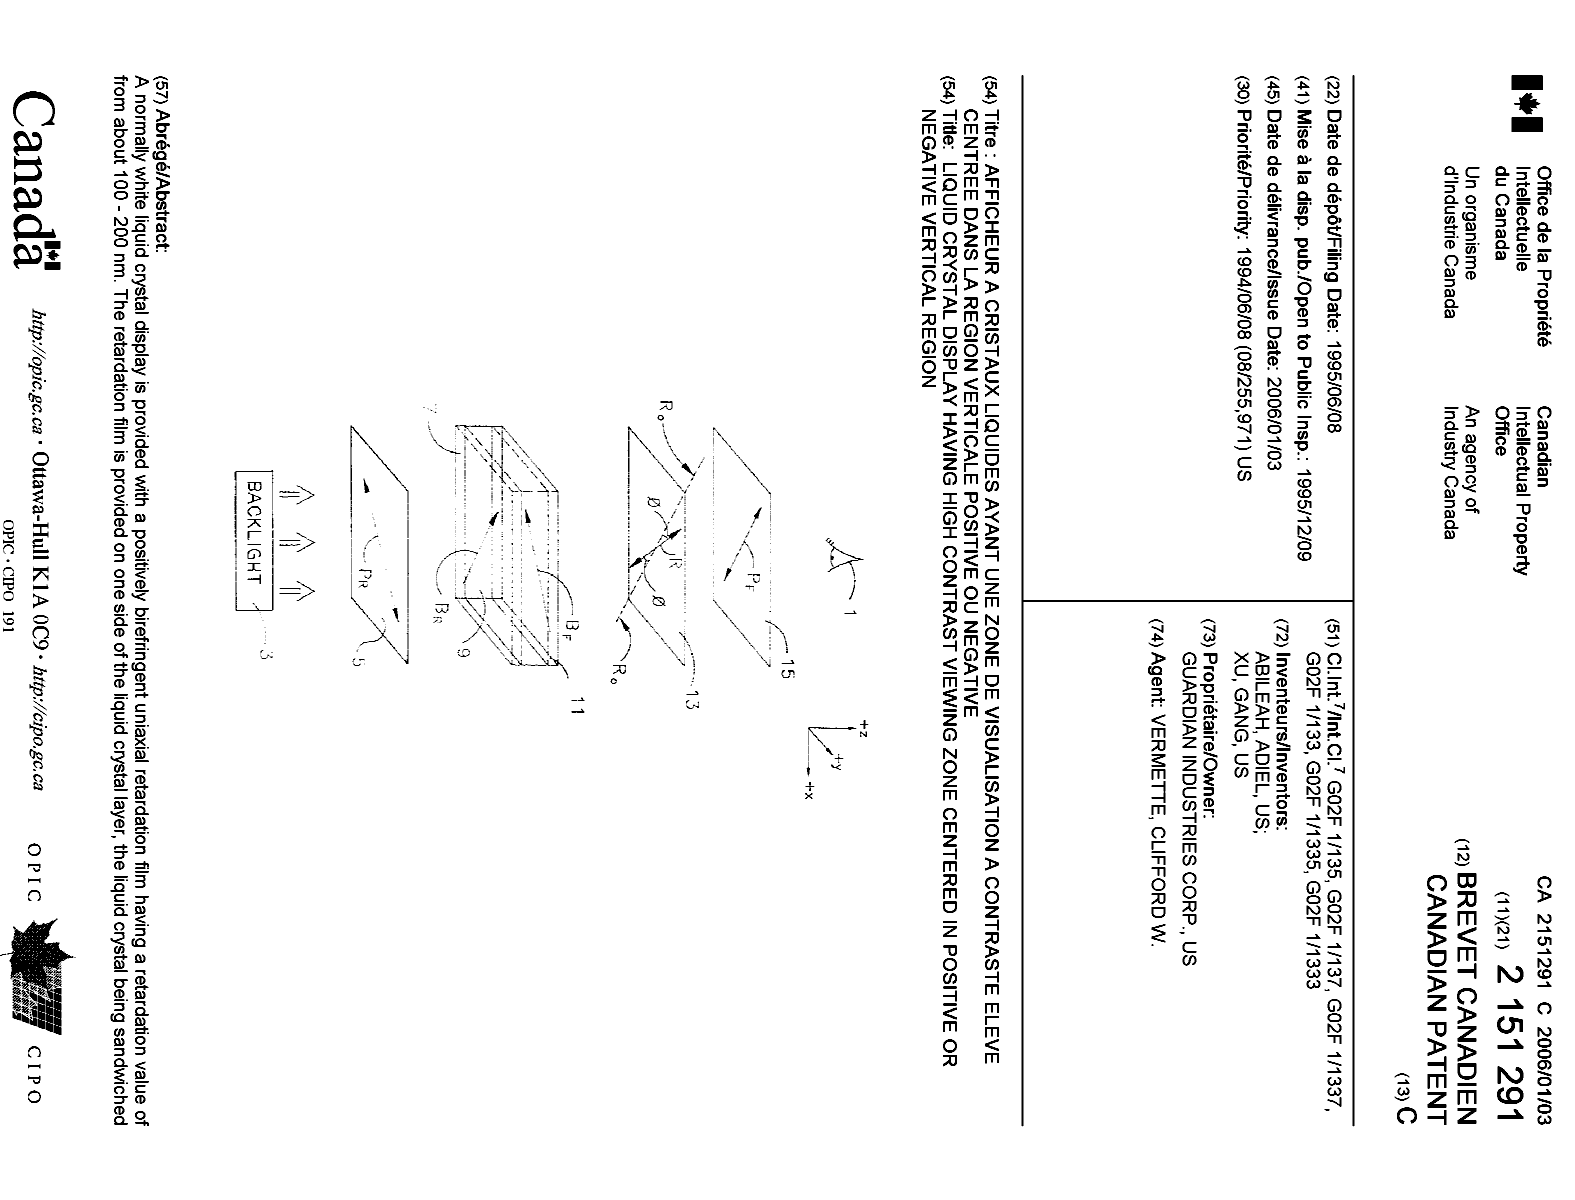 Canadian Patent Document 2151291. Cover Page 20051202. Image 1 of 2